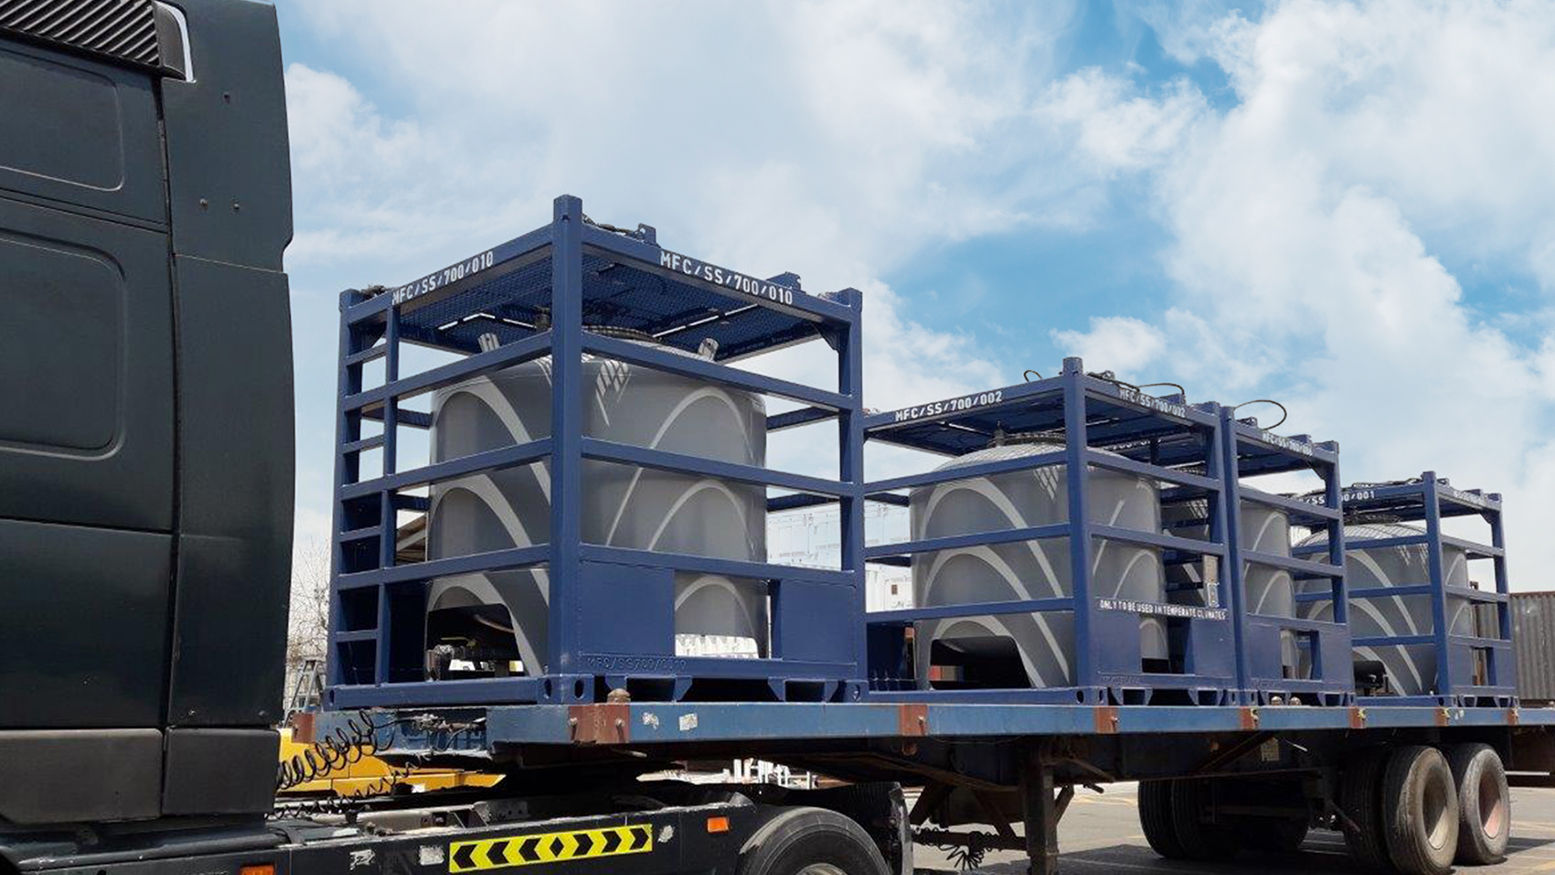 DNV certified container tanks